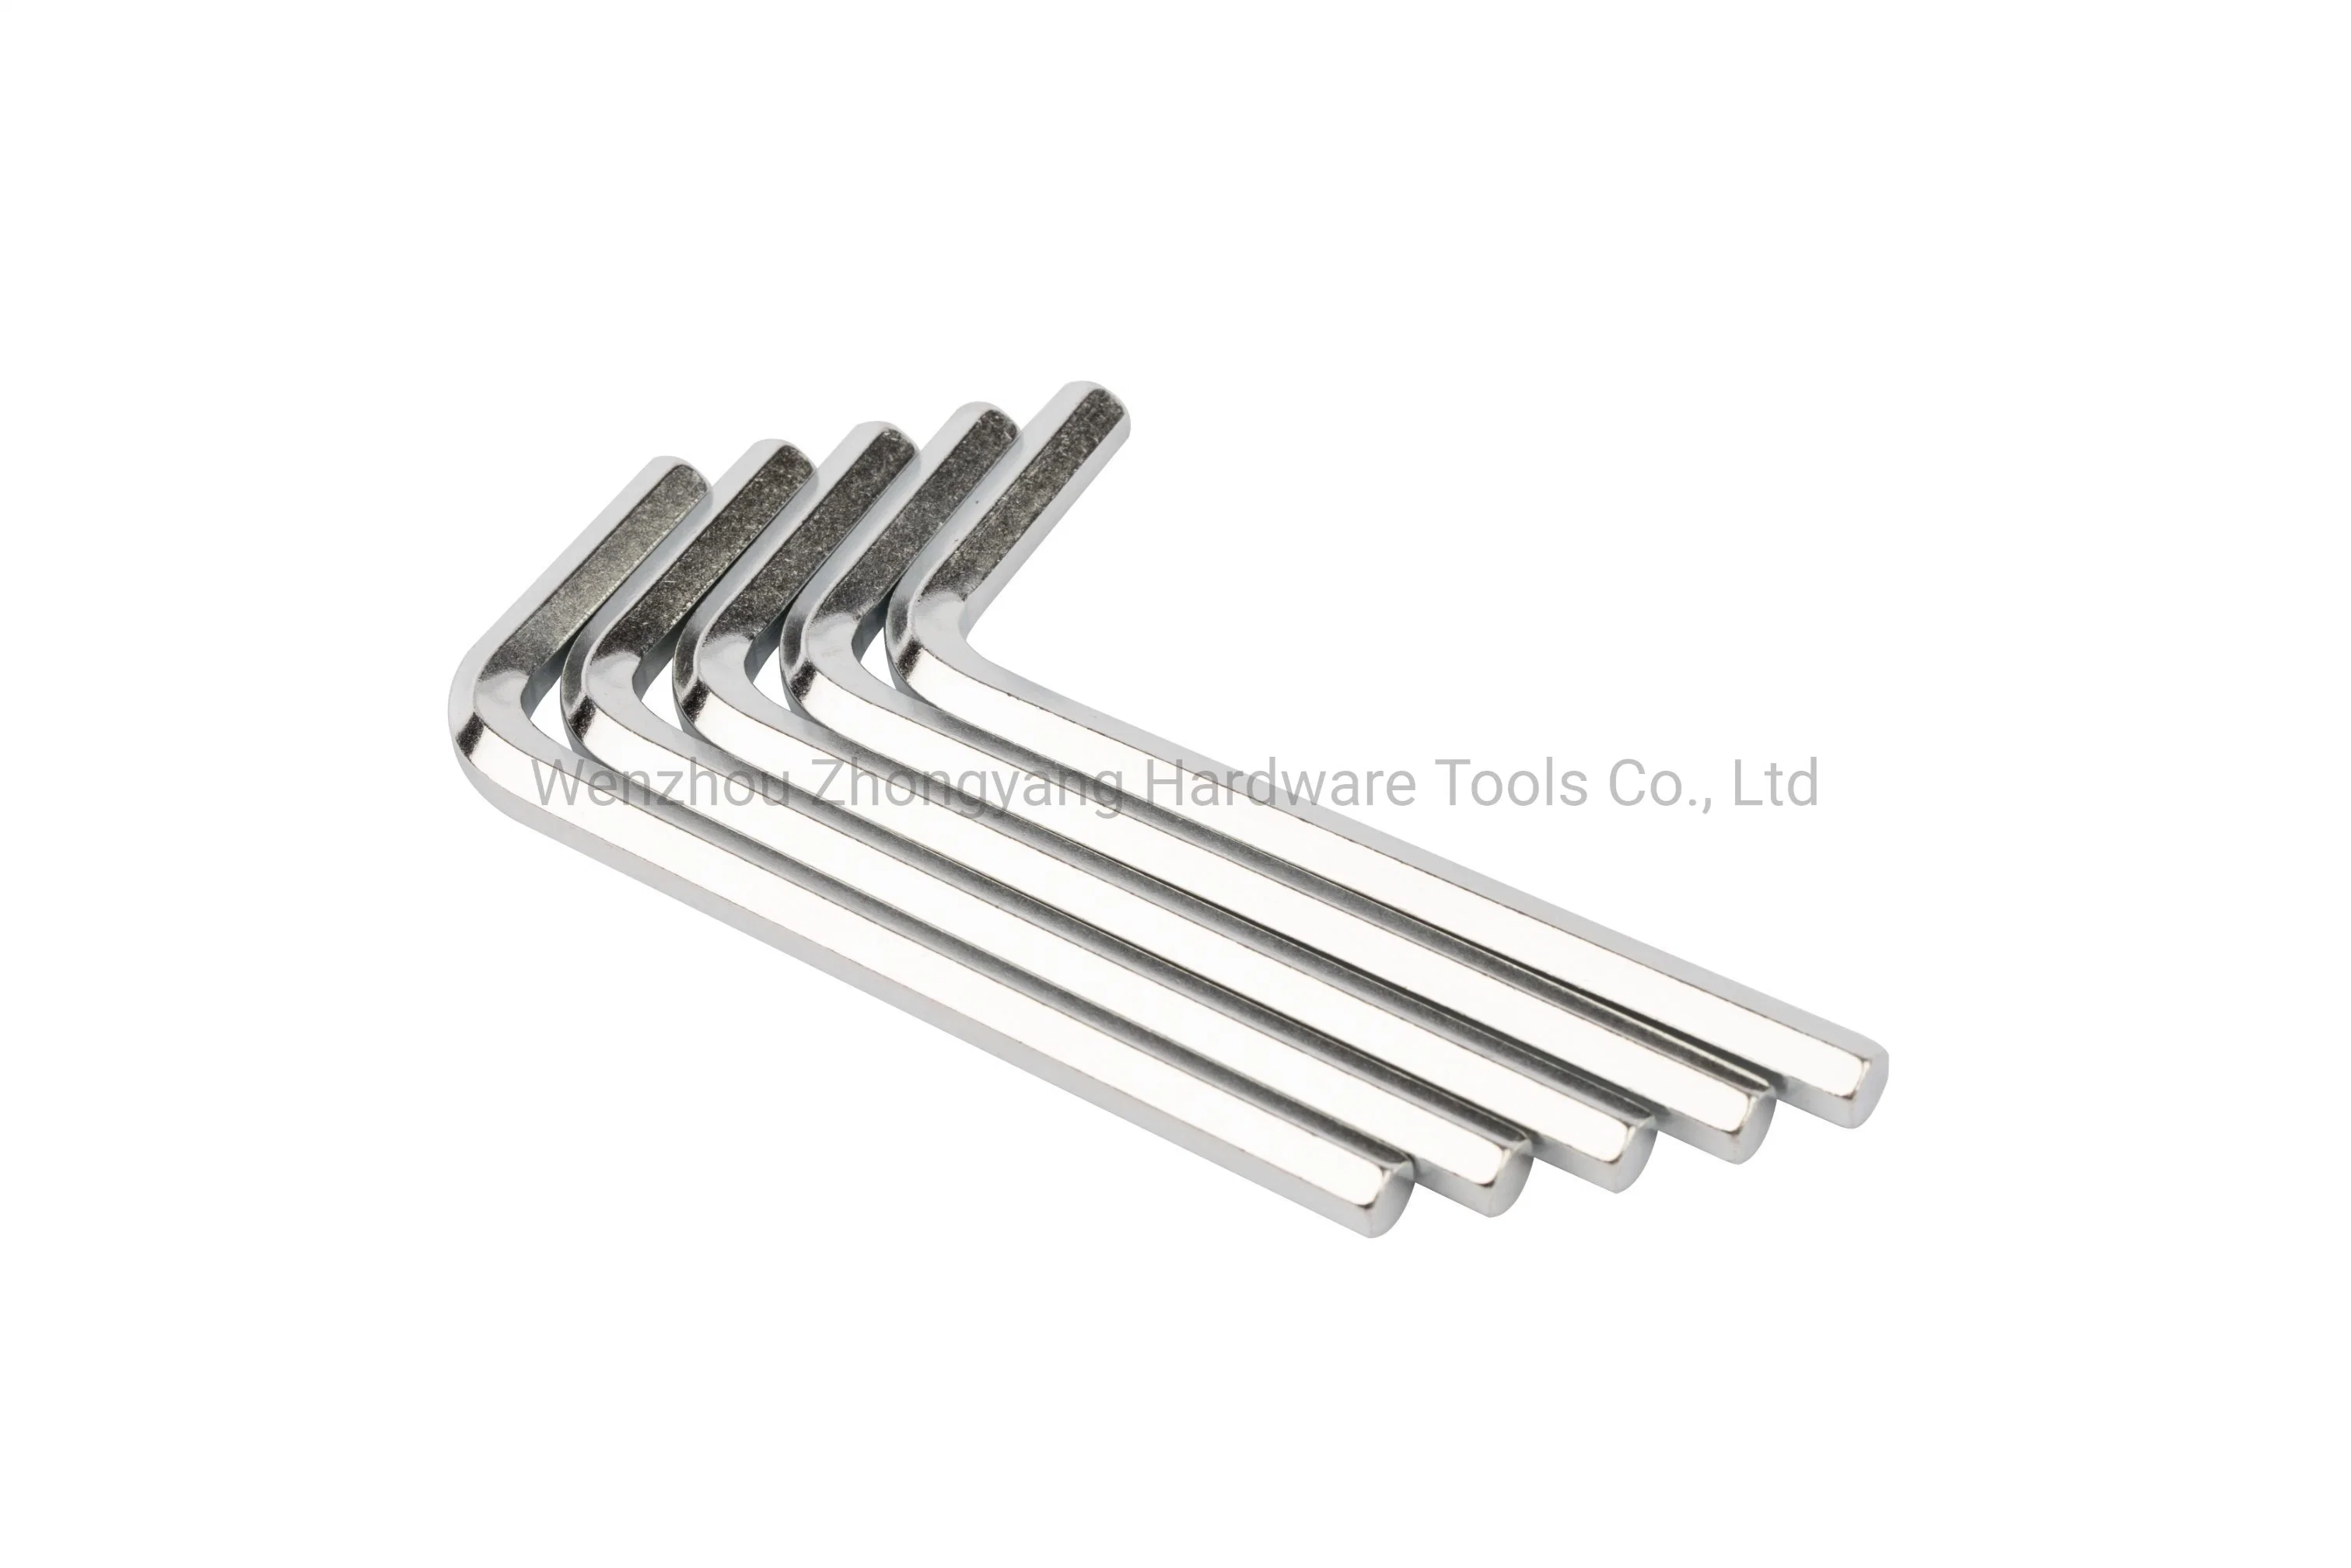 High Quality Allen Hex Key for Bicycle Installation Allen Wrench.